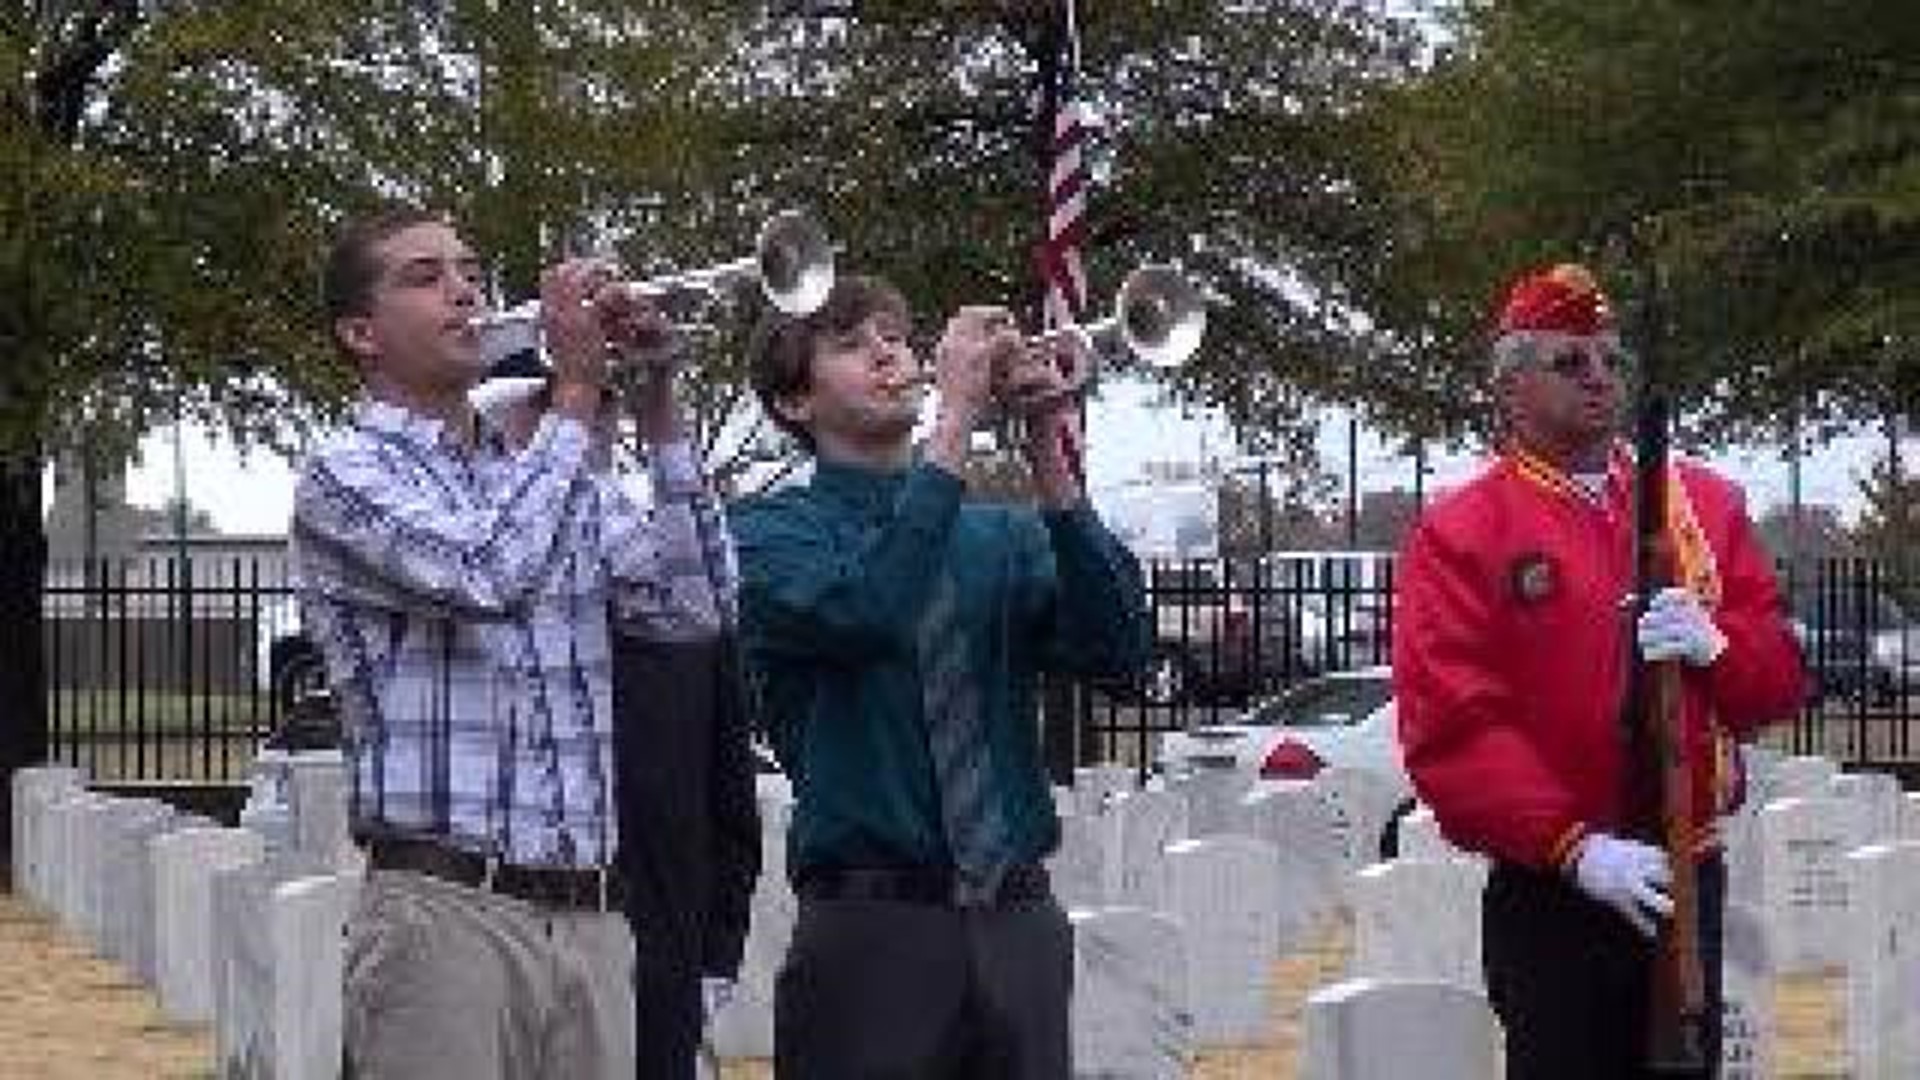 Fort Smith Marks Veterans Day with Ceremony